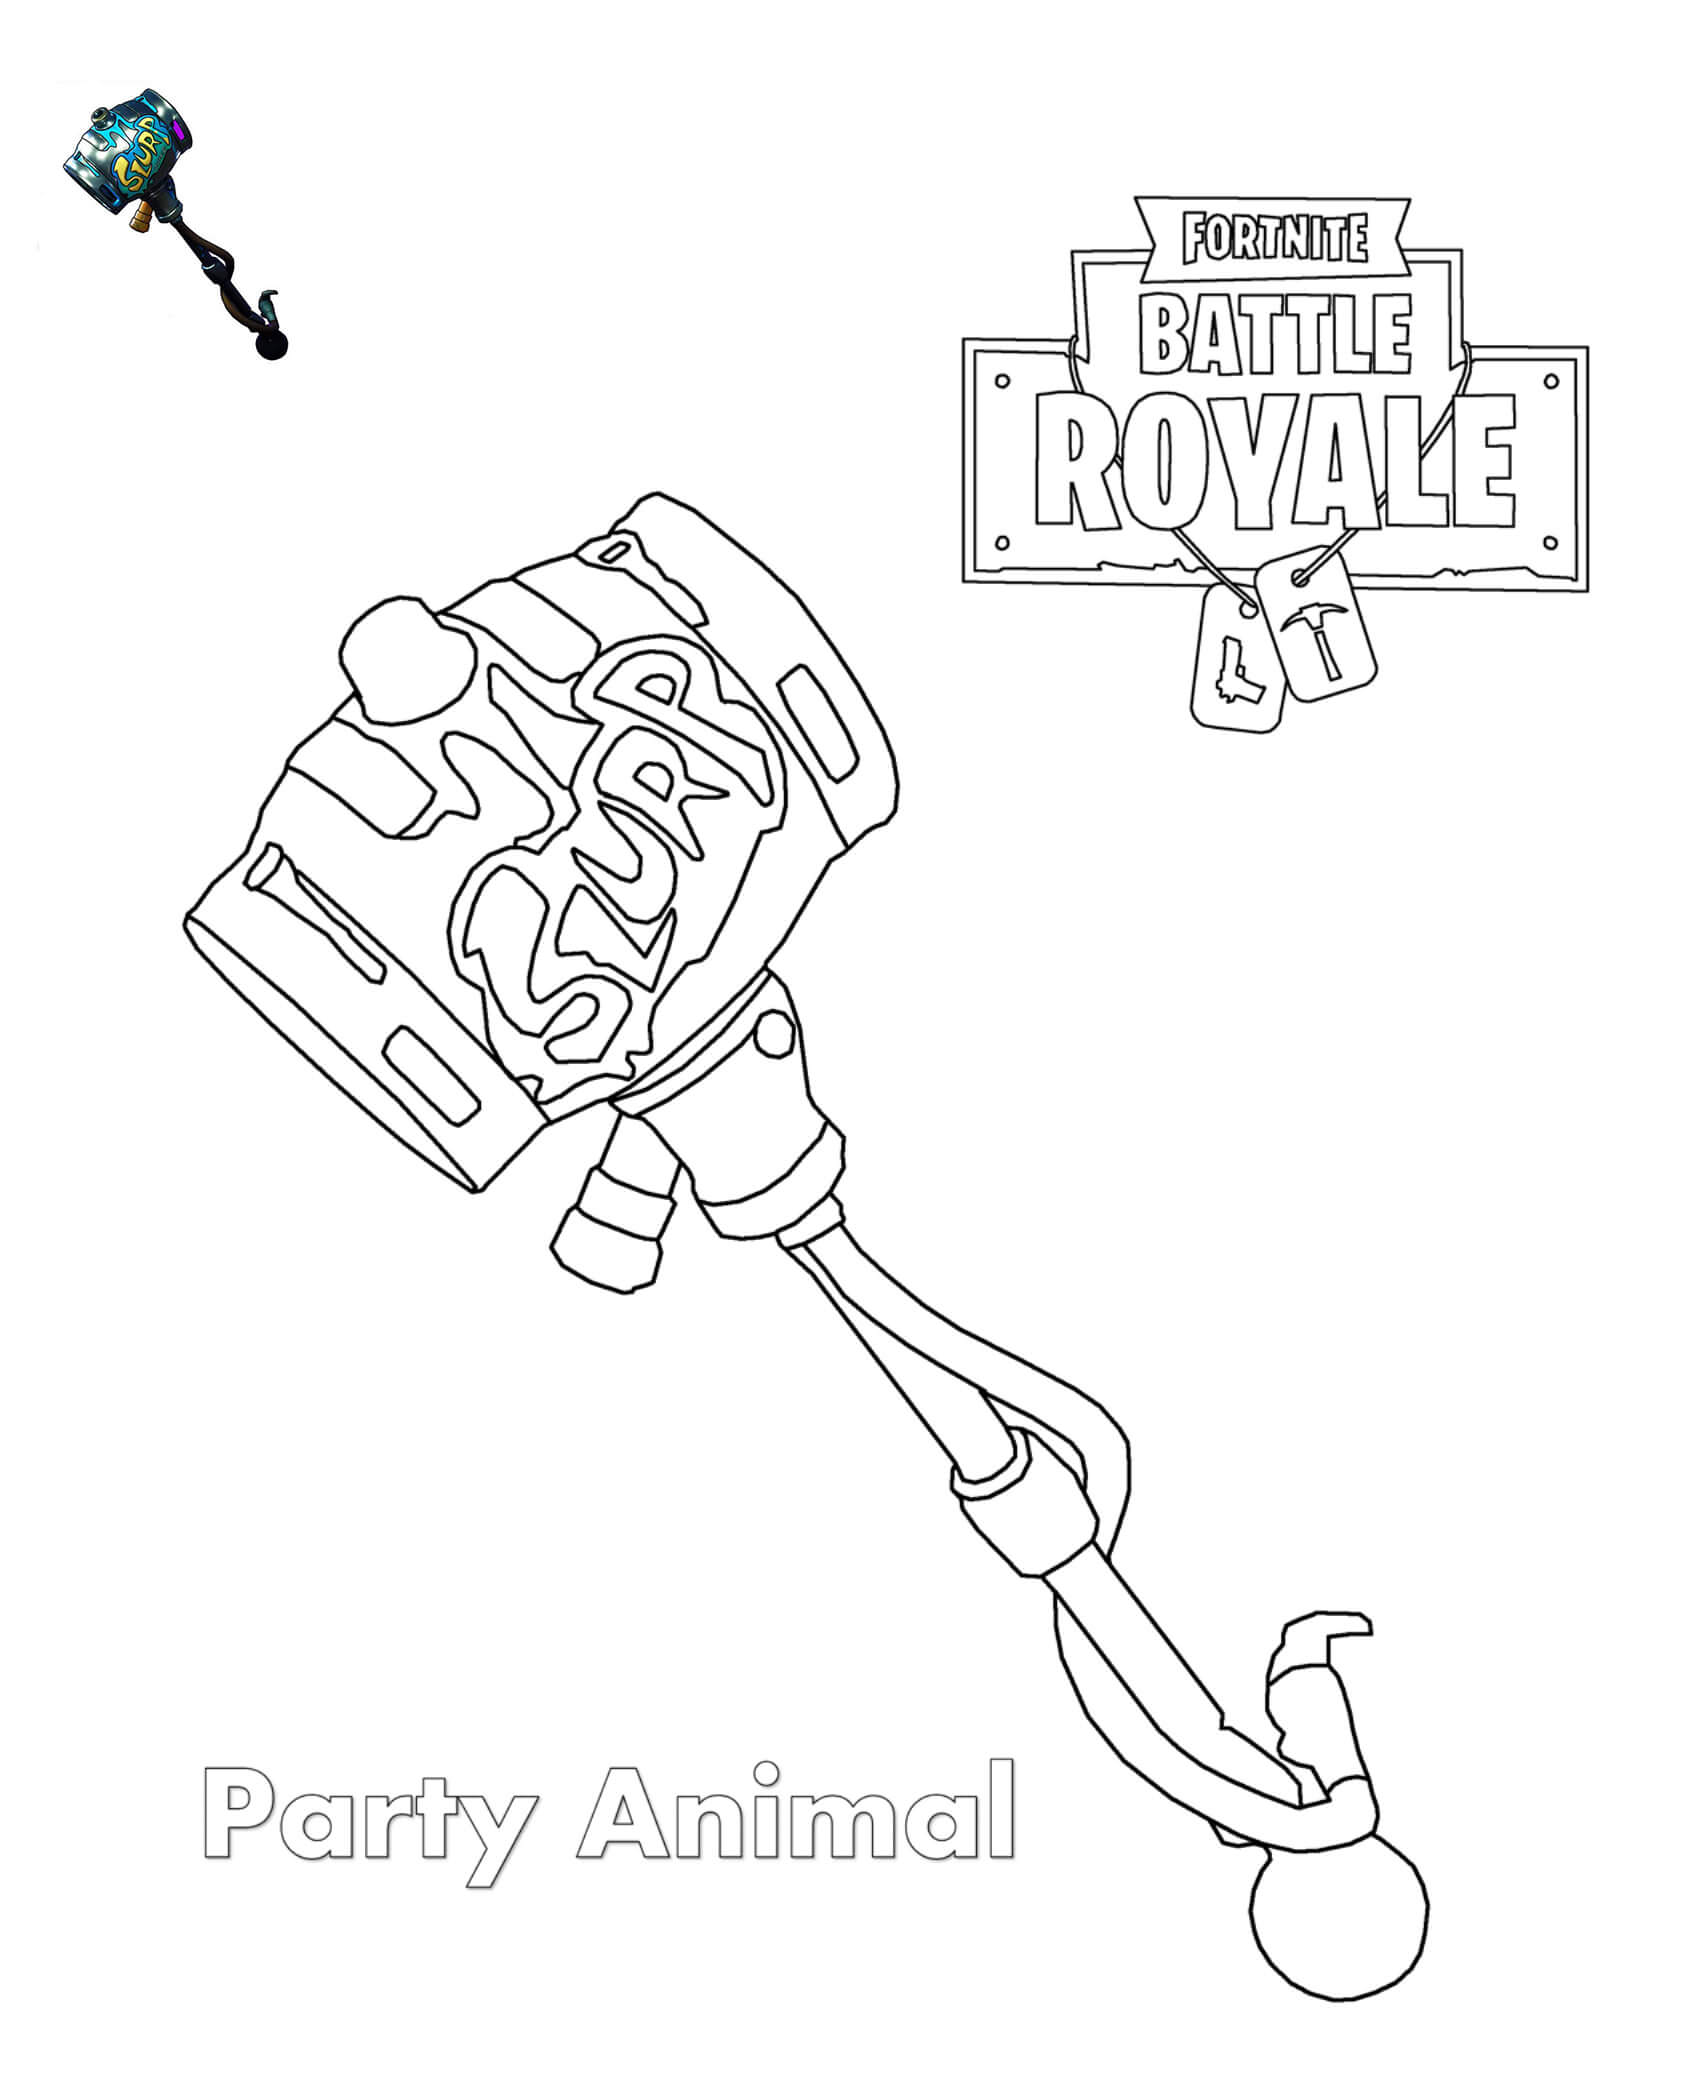 Party Animal Fortnite